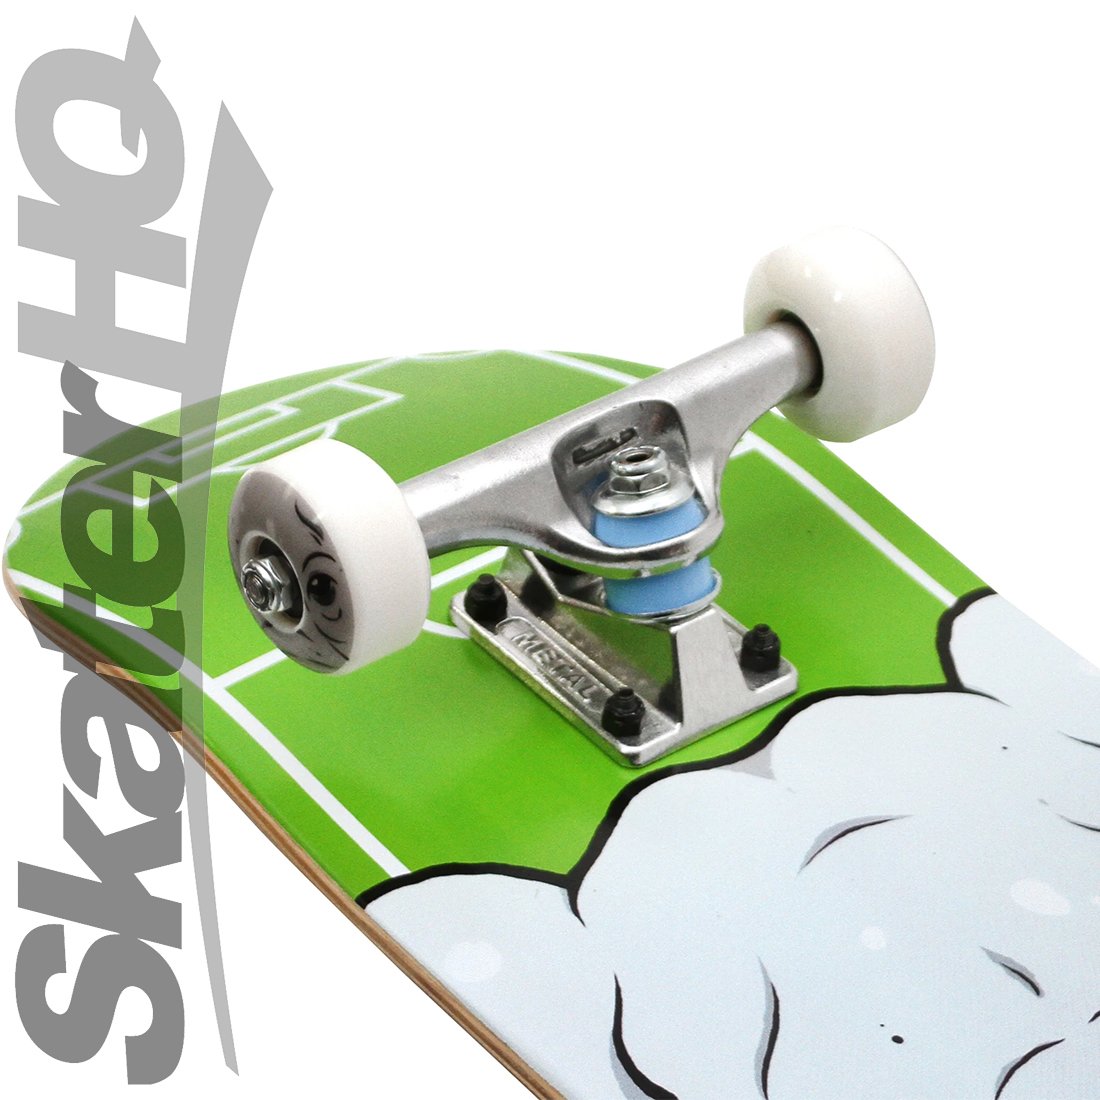 Holiday Sporting Elephant 7.25 Mini Complete Skateboard Completes Modern Street